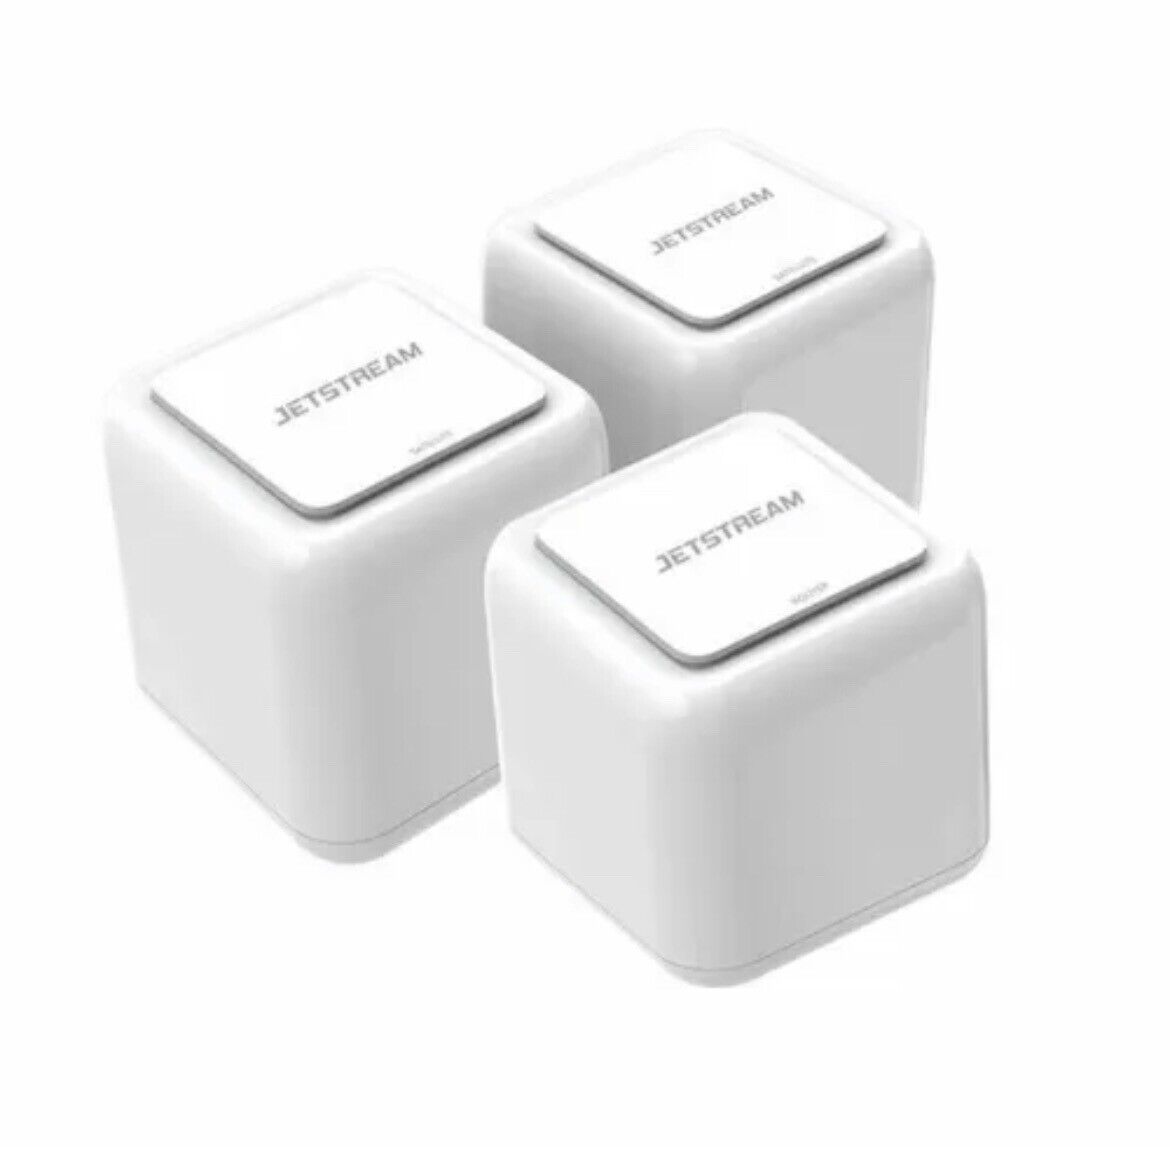 Jetstream AC1200 Whole Home WiFi Mesh Routers 3-Pack (EMESH3200)™ OPEN BOX